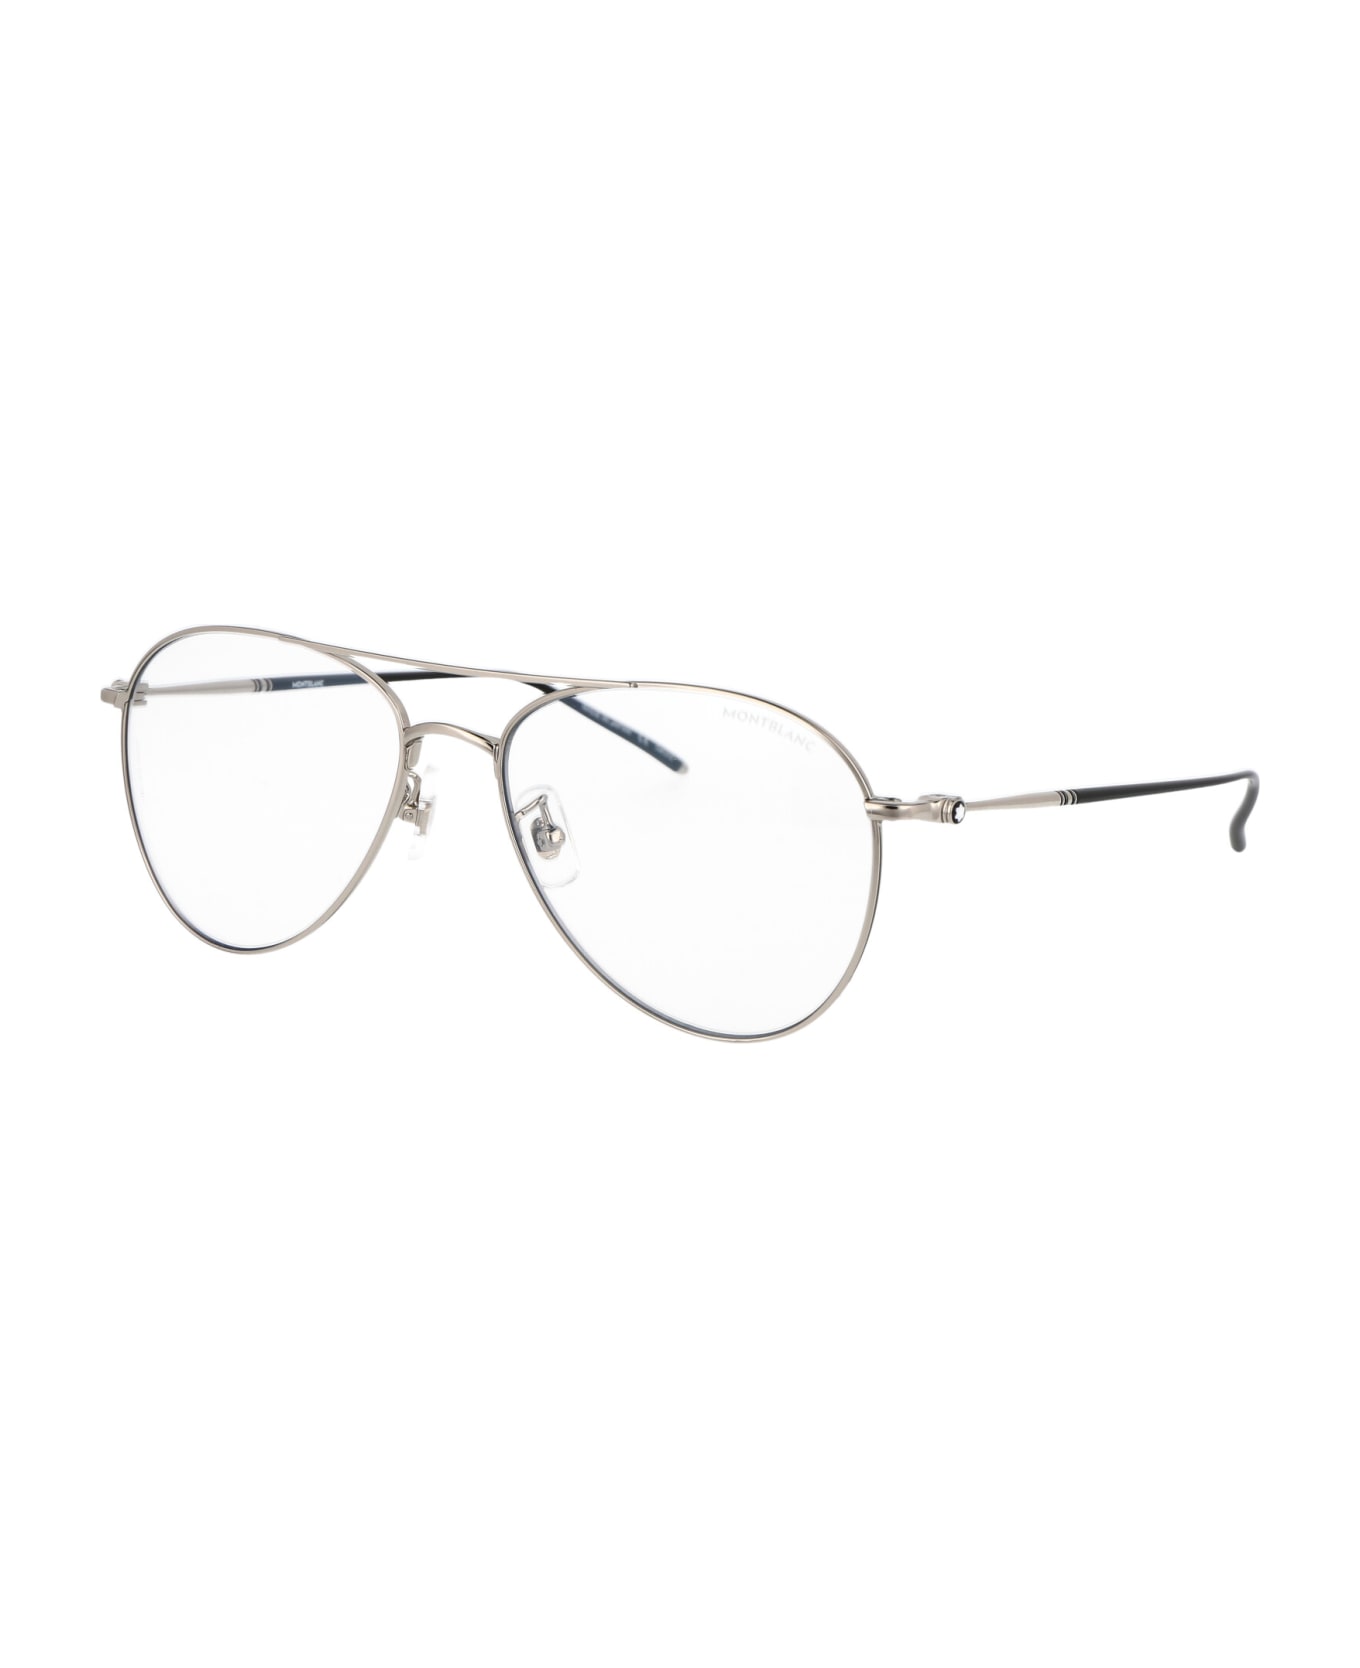 Montblanc Mb0128s Sunglasses - 009 SILVER SILVER TRANSPARENT